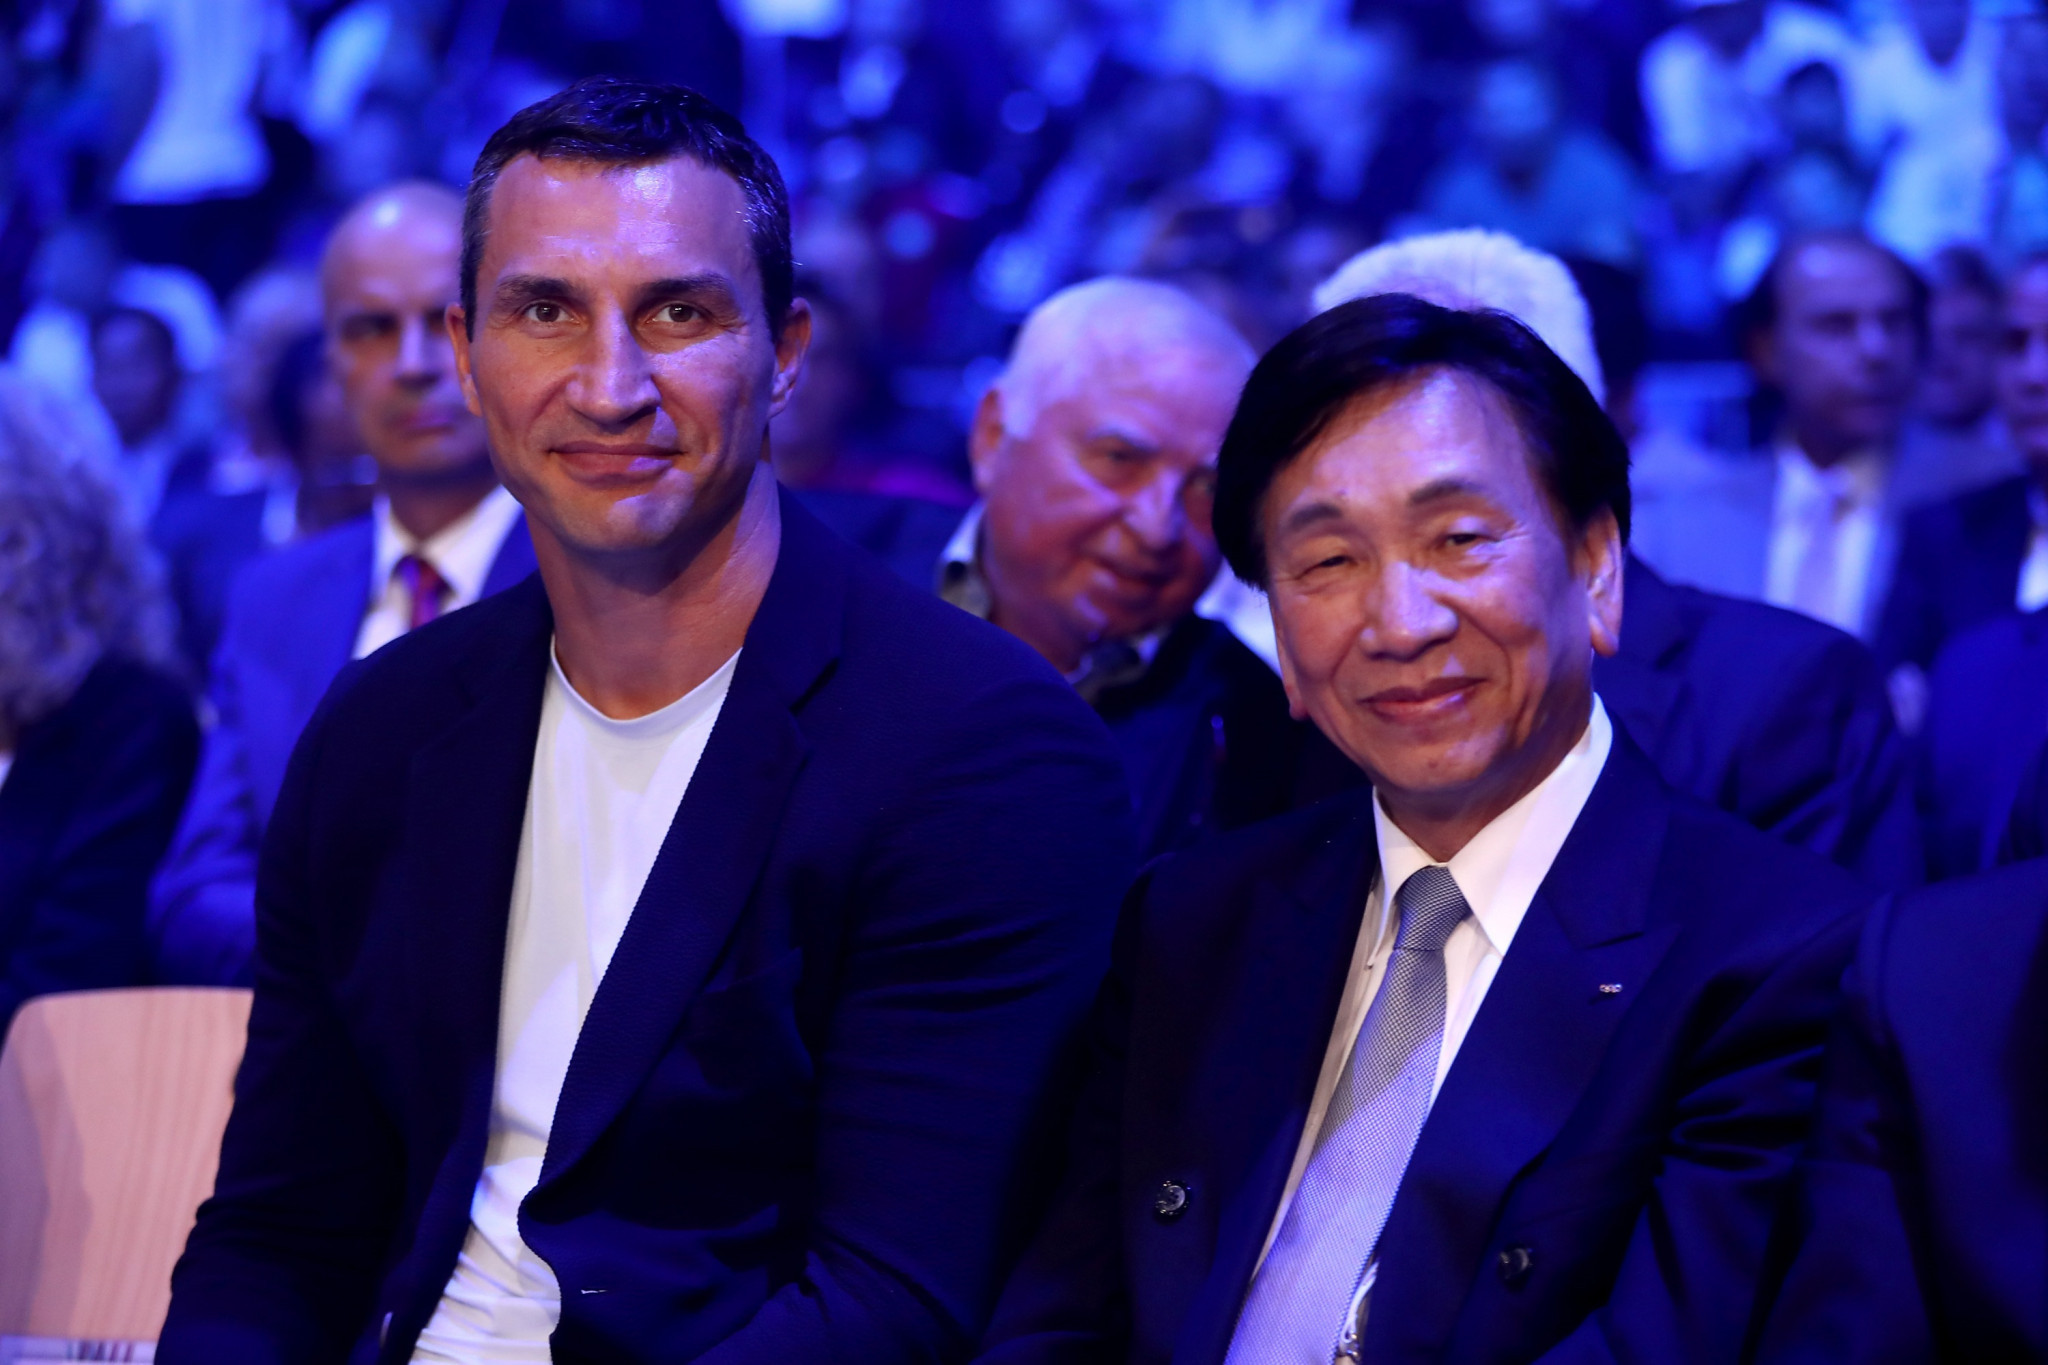 C K Wu, pictured here with Ukrainian boxing legend Wladimir Klitschko during the 2017 AIBA World Boxing Championships in Hamburg, had been AIBA President since 2006 ©Getty Images